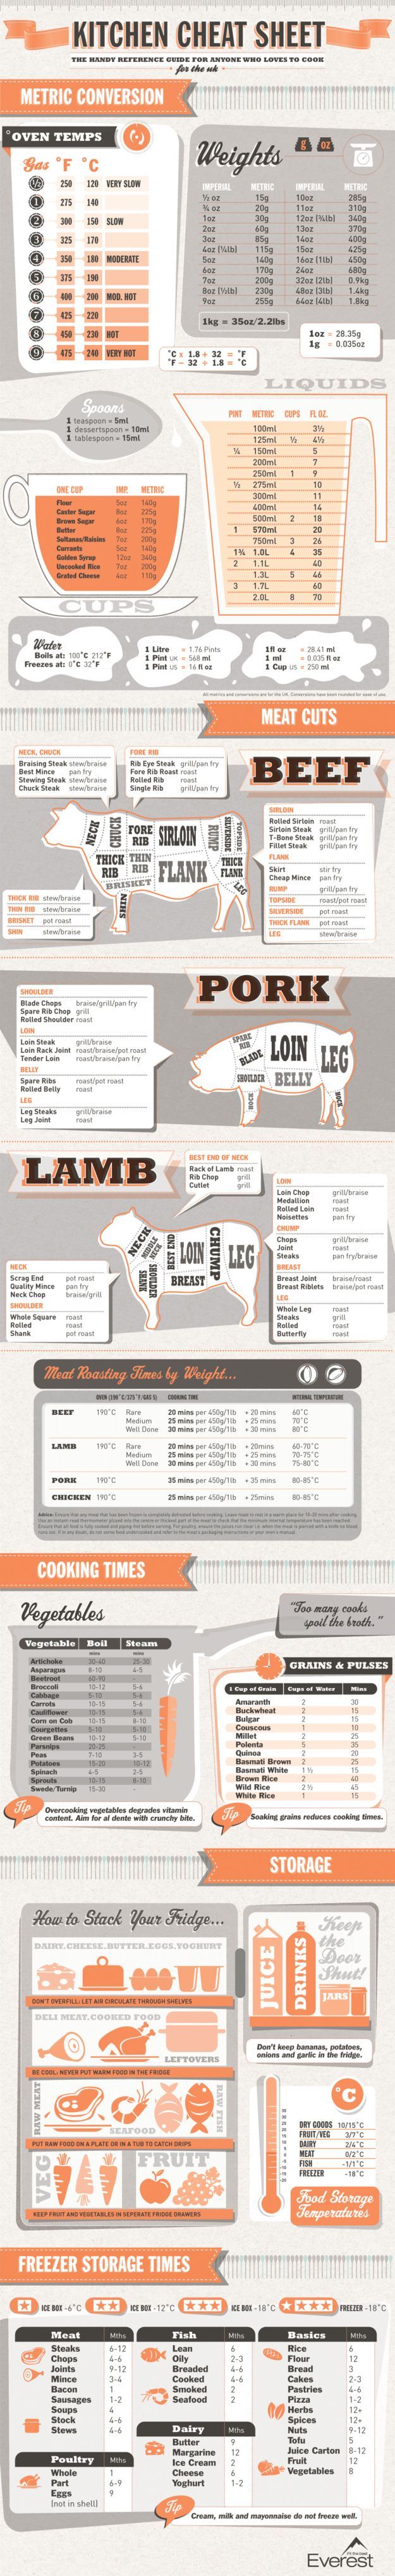 The Only Kitchen Cheat Sheet You Need